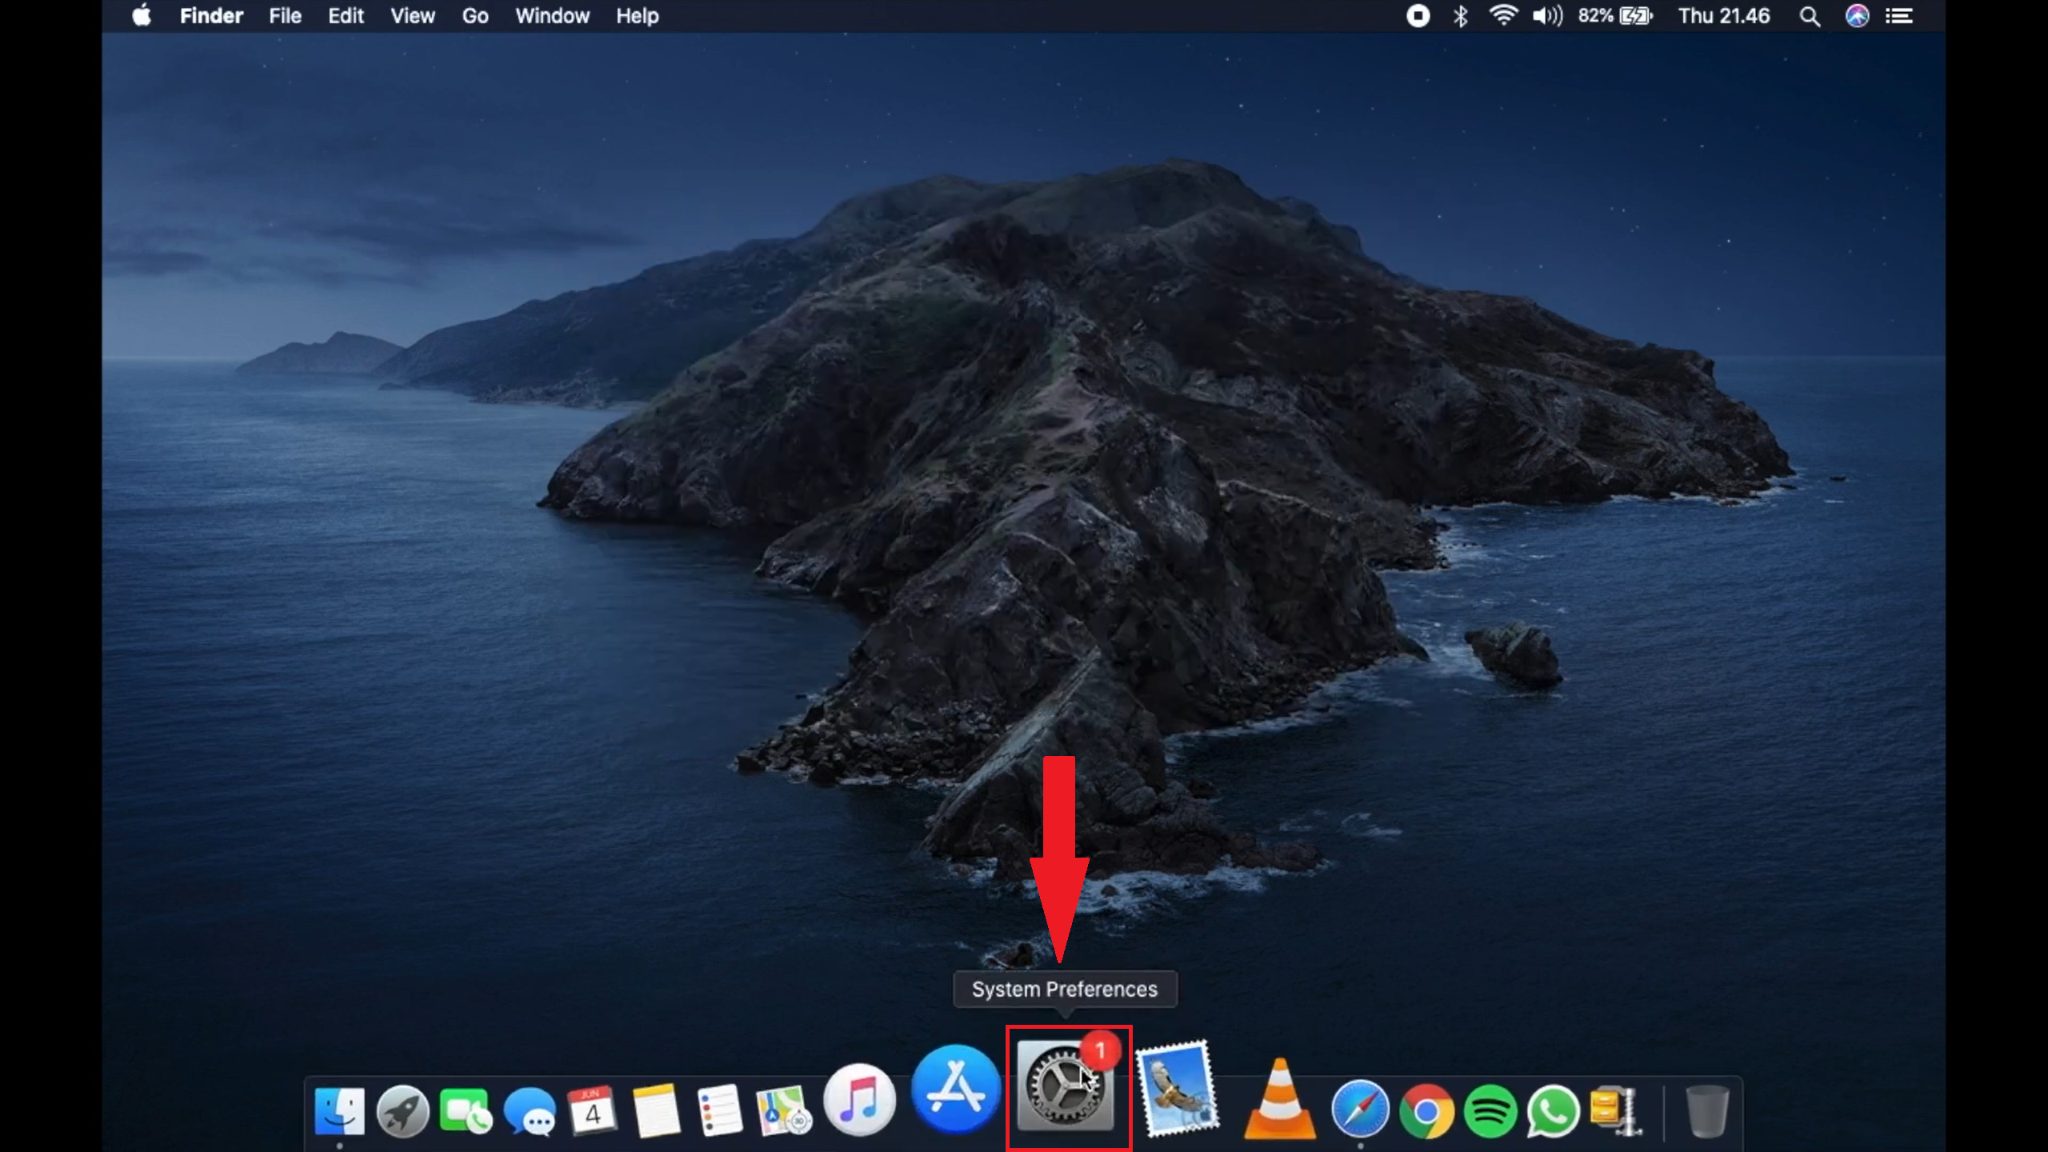 - How To Turn On Airplane Mode On Macbook